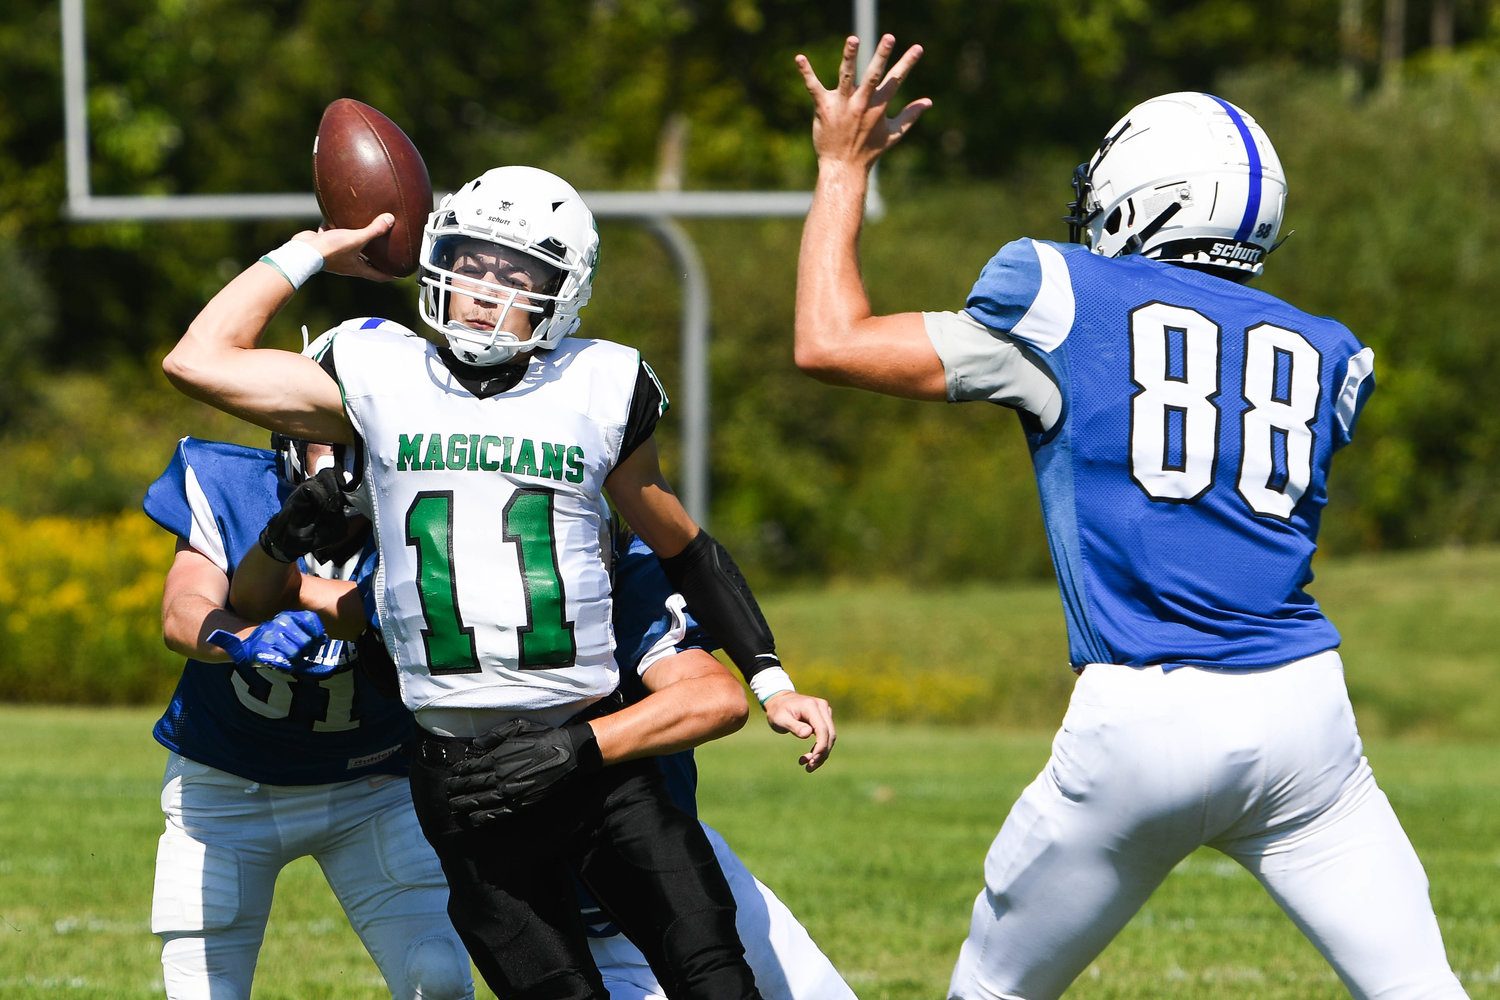 Herkimer quarterback Nick Caruso (11) is hit by Dolgeville defenders while throwing during the game on Saturday.